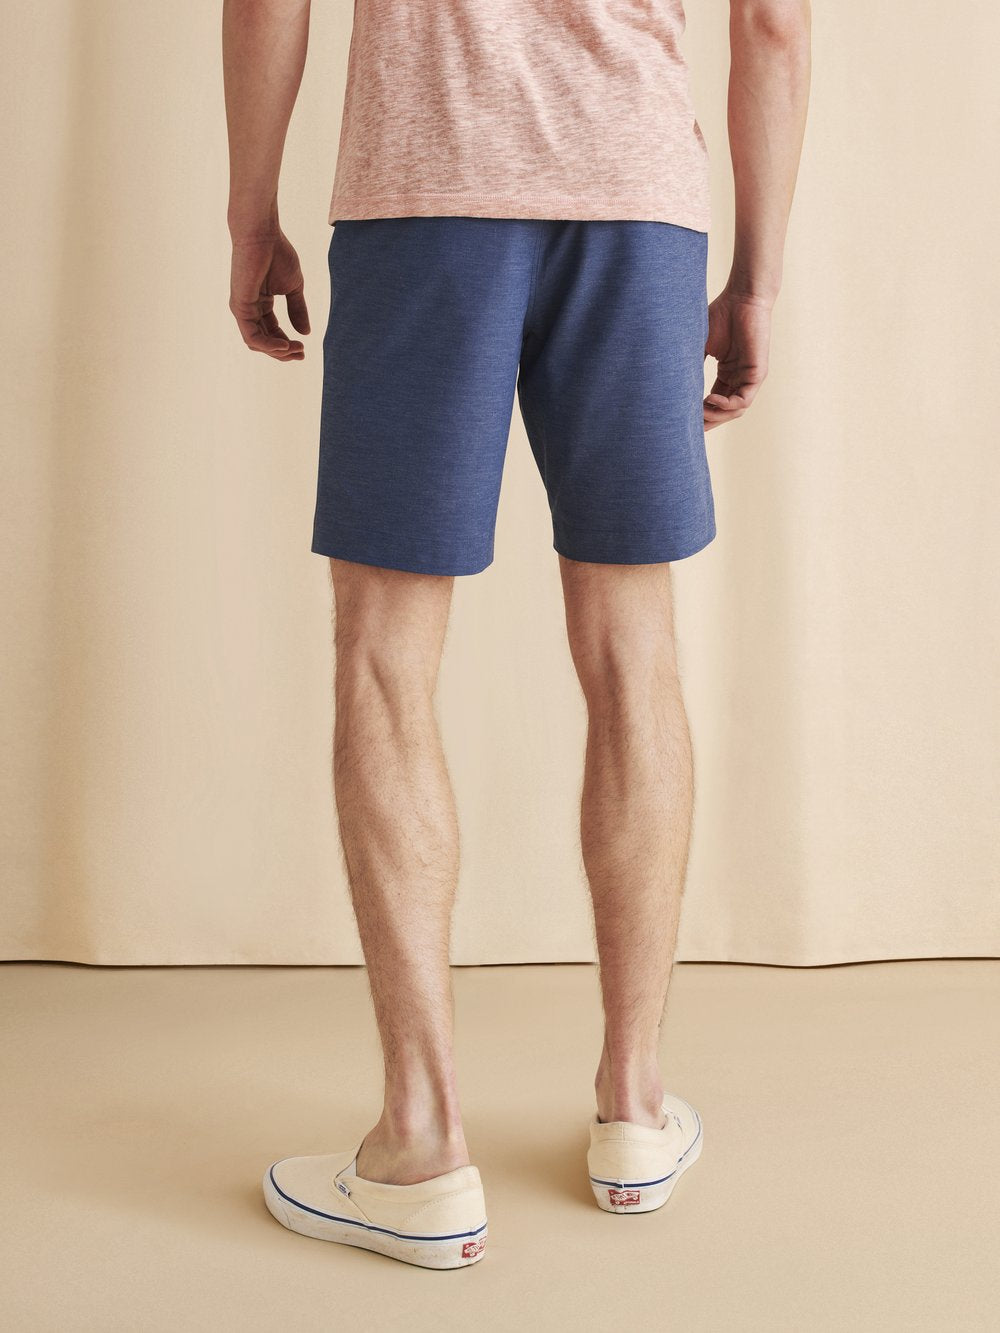 ALL DAY SHORTS (9 IN) - NAVY